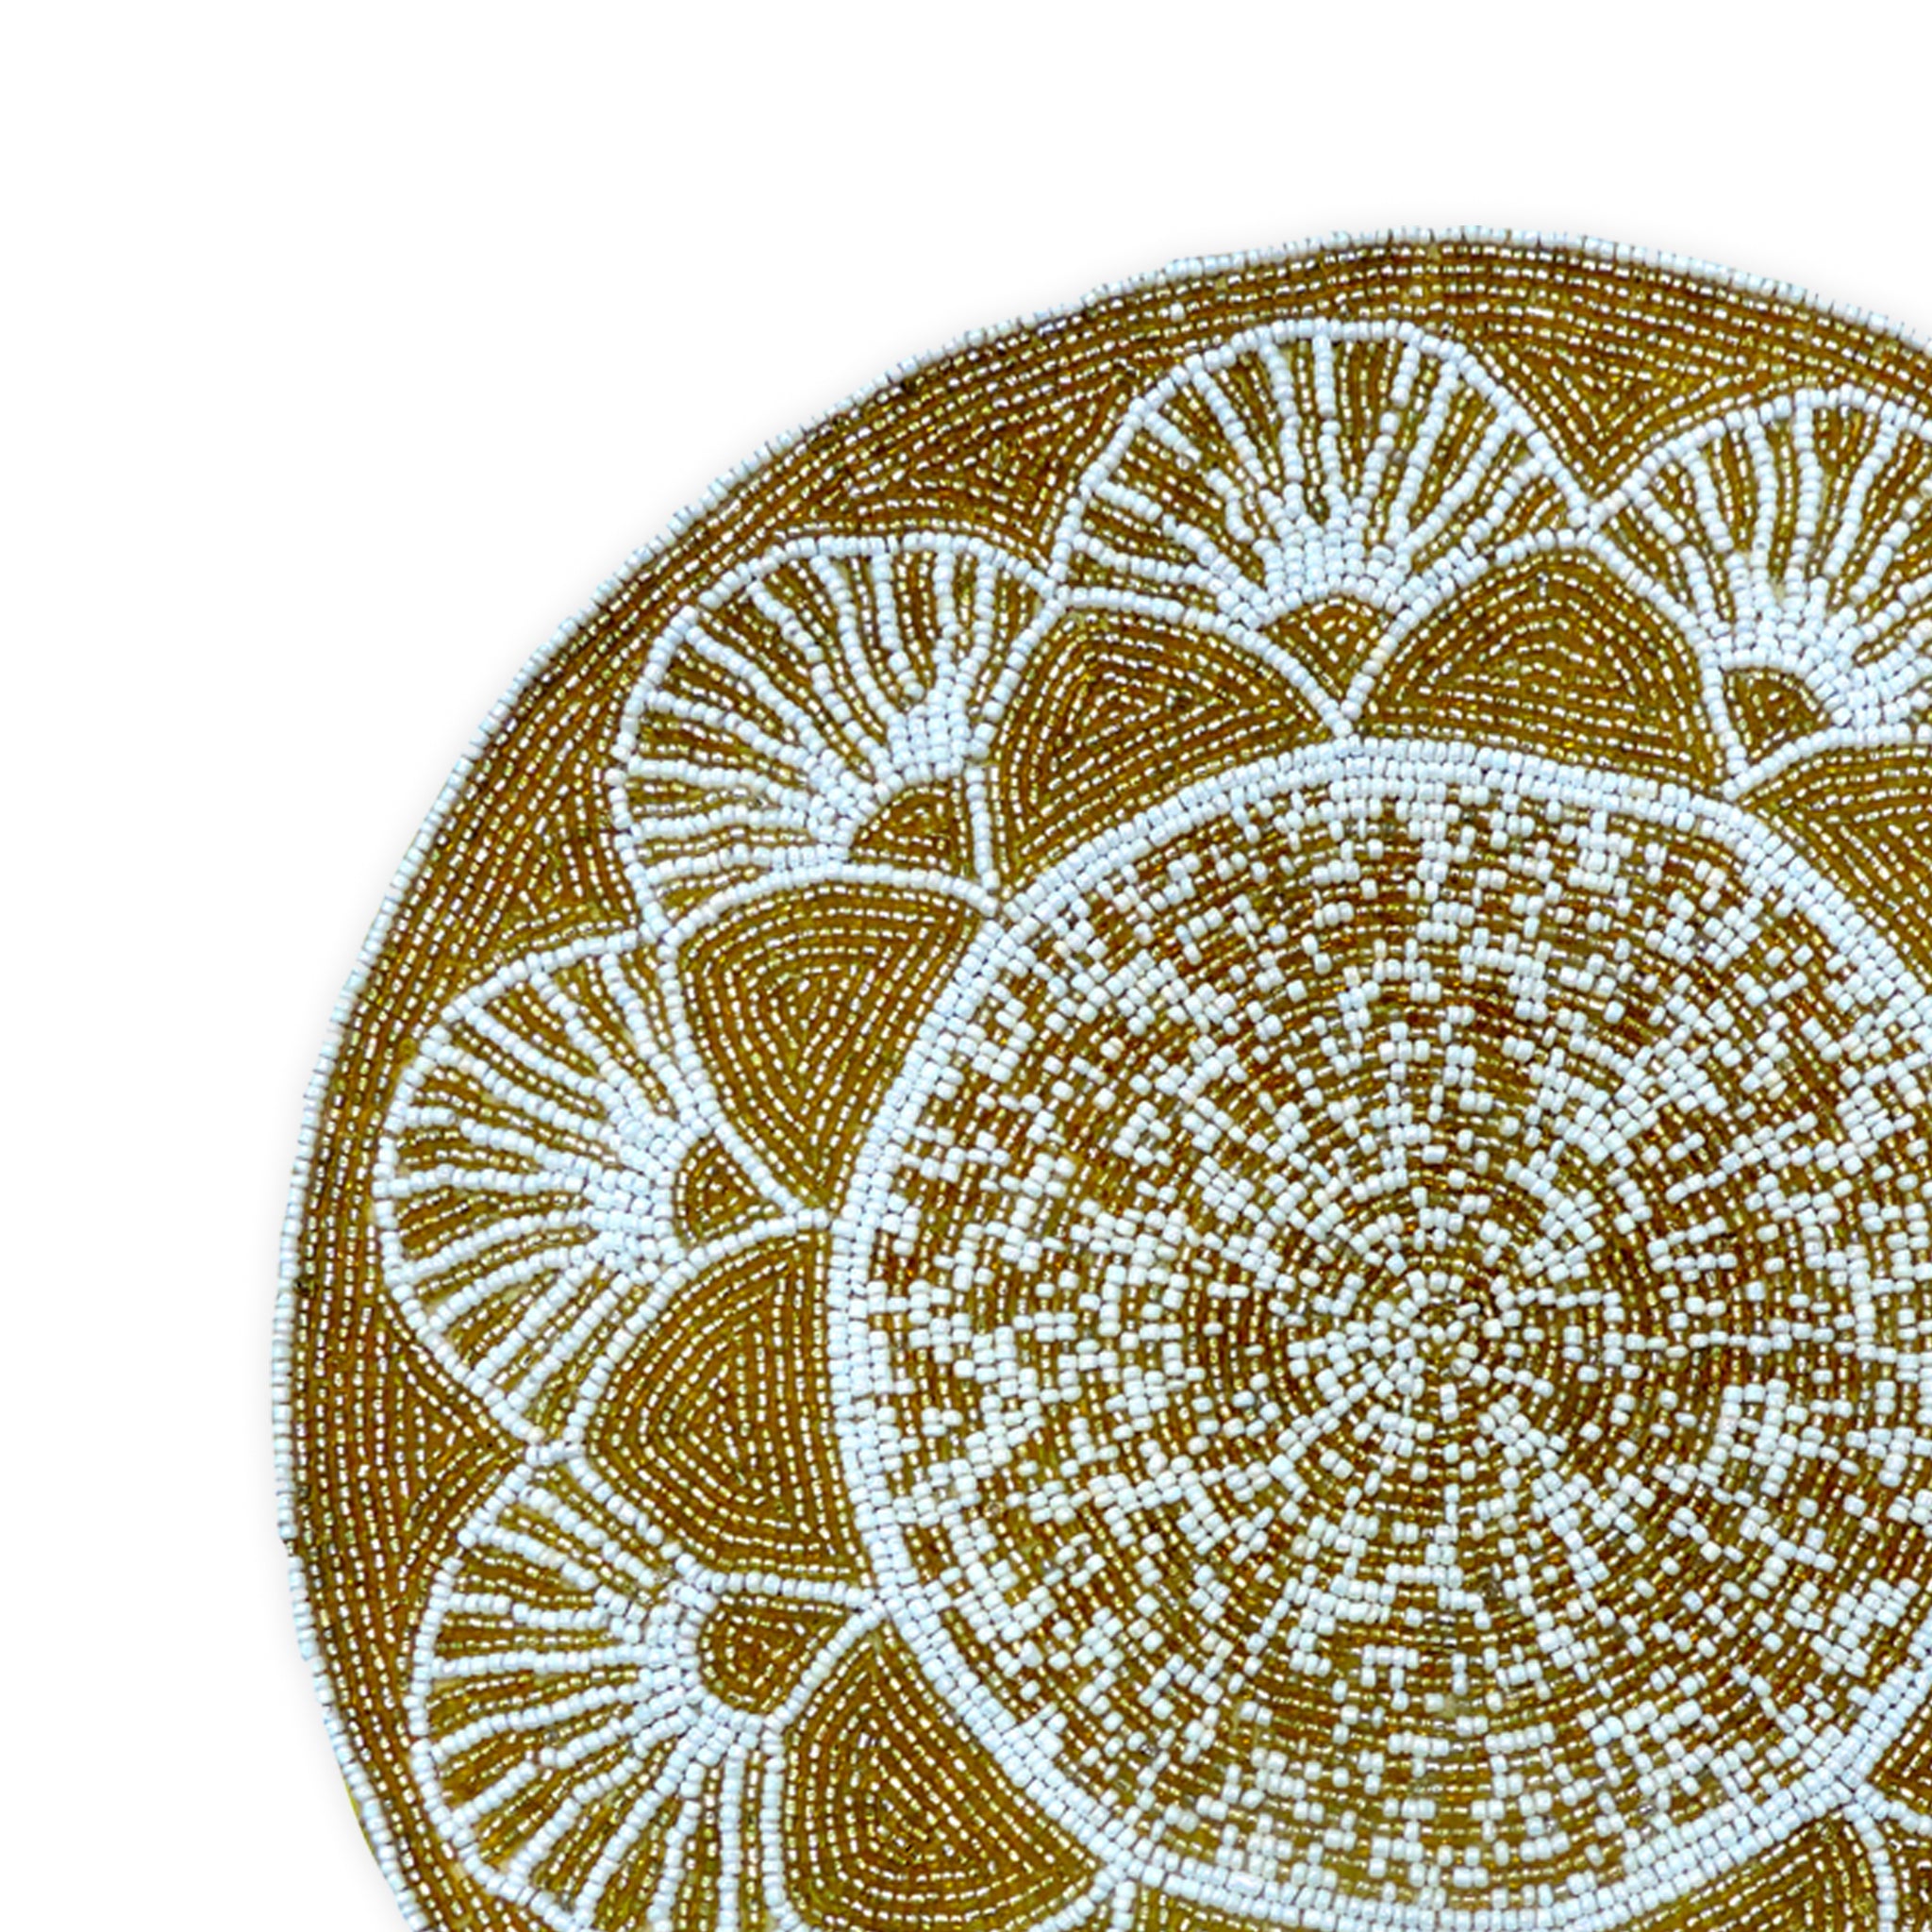 Glass Bead Embroidered Placemats, Chargers/ 14 inch Round/ set of 2 / Gold